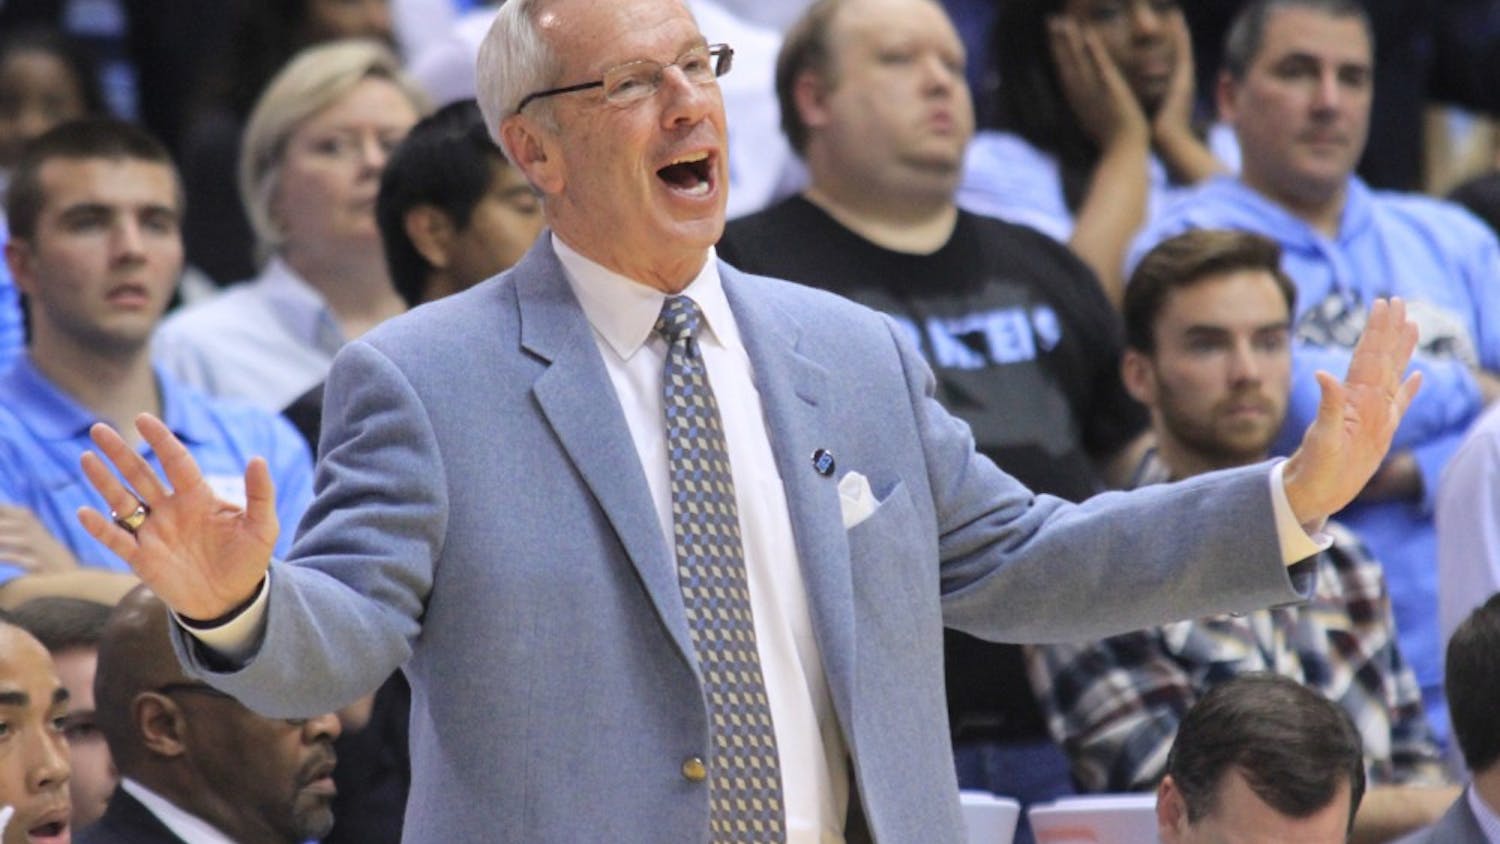 The UNC men's basketball team lost to NC State 58-46 at the Dean Smith Center in Chapel Hill, N.C. on Feb. 24. The Tar Heels' 46 points are the least the Tar Heels have ever score din the Smith Center. 